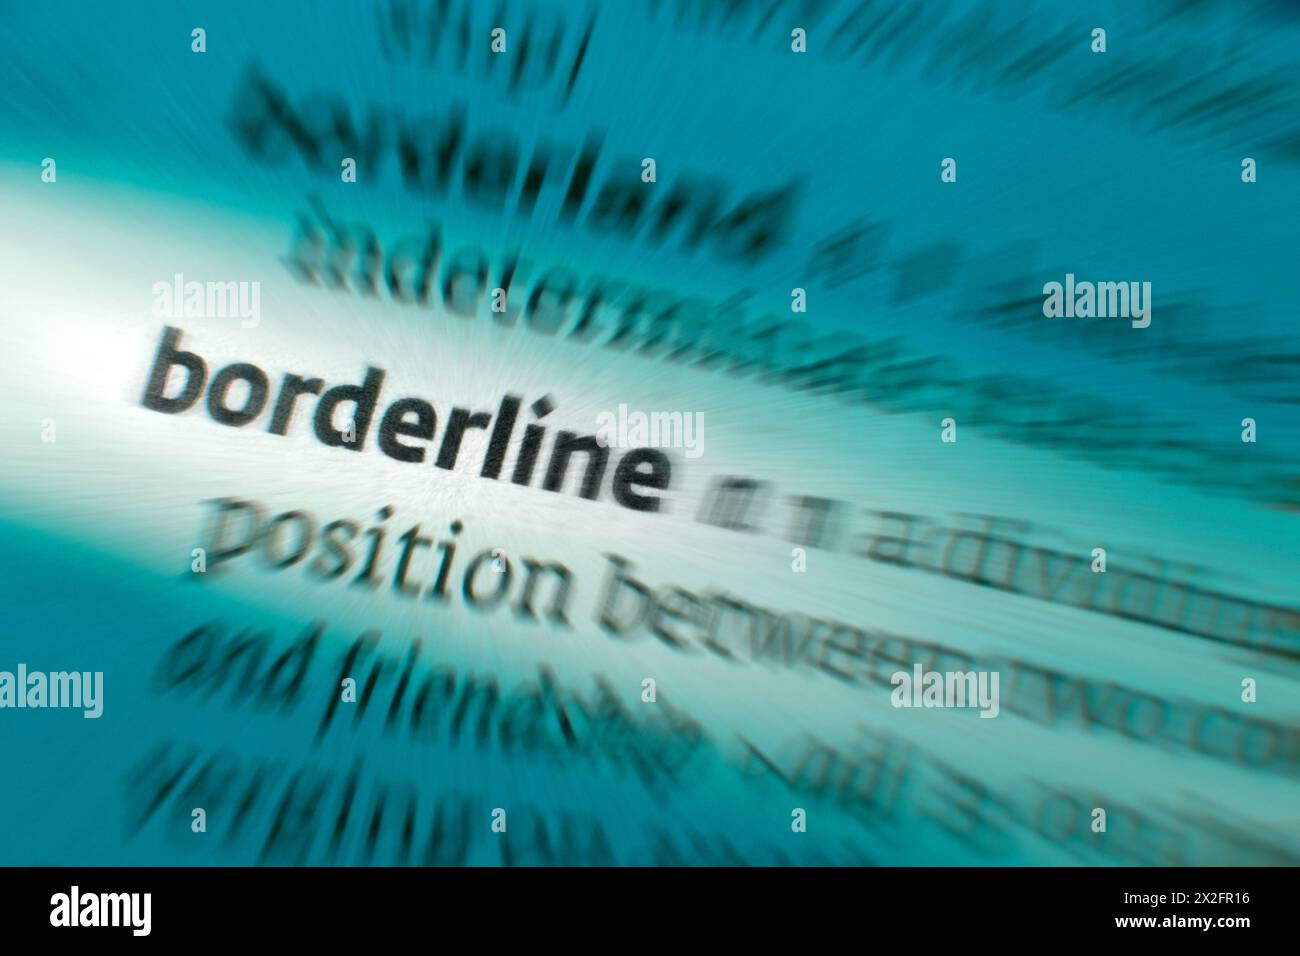 Borderline - only just acceptable in quality or as belonging to a category. A boundary separating two countries or a division between two distinct or Stock Photo